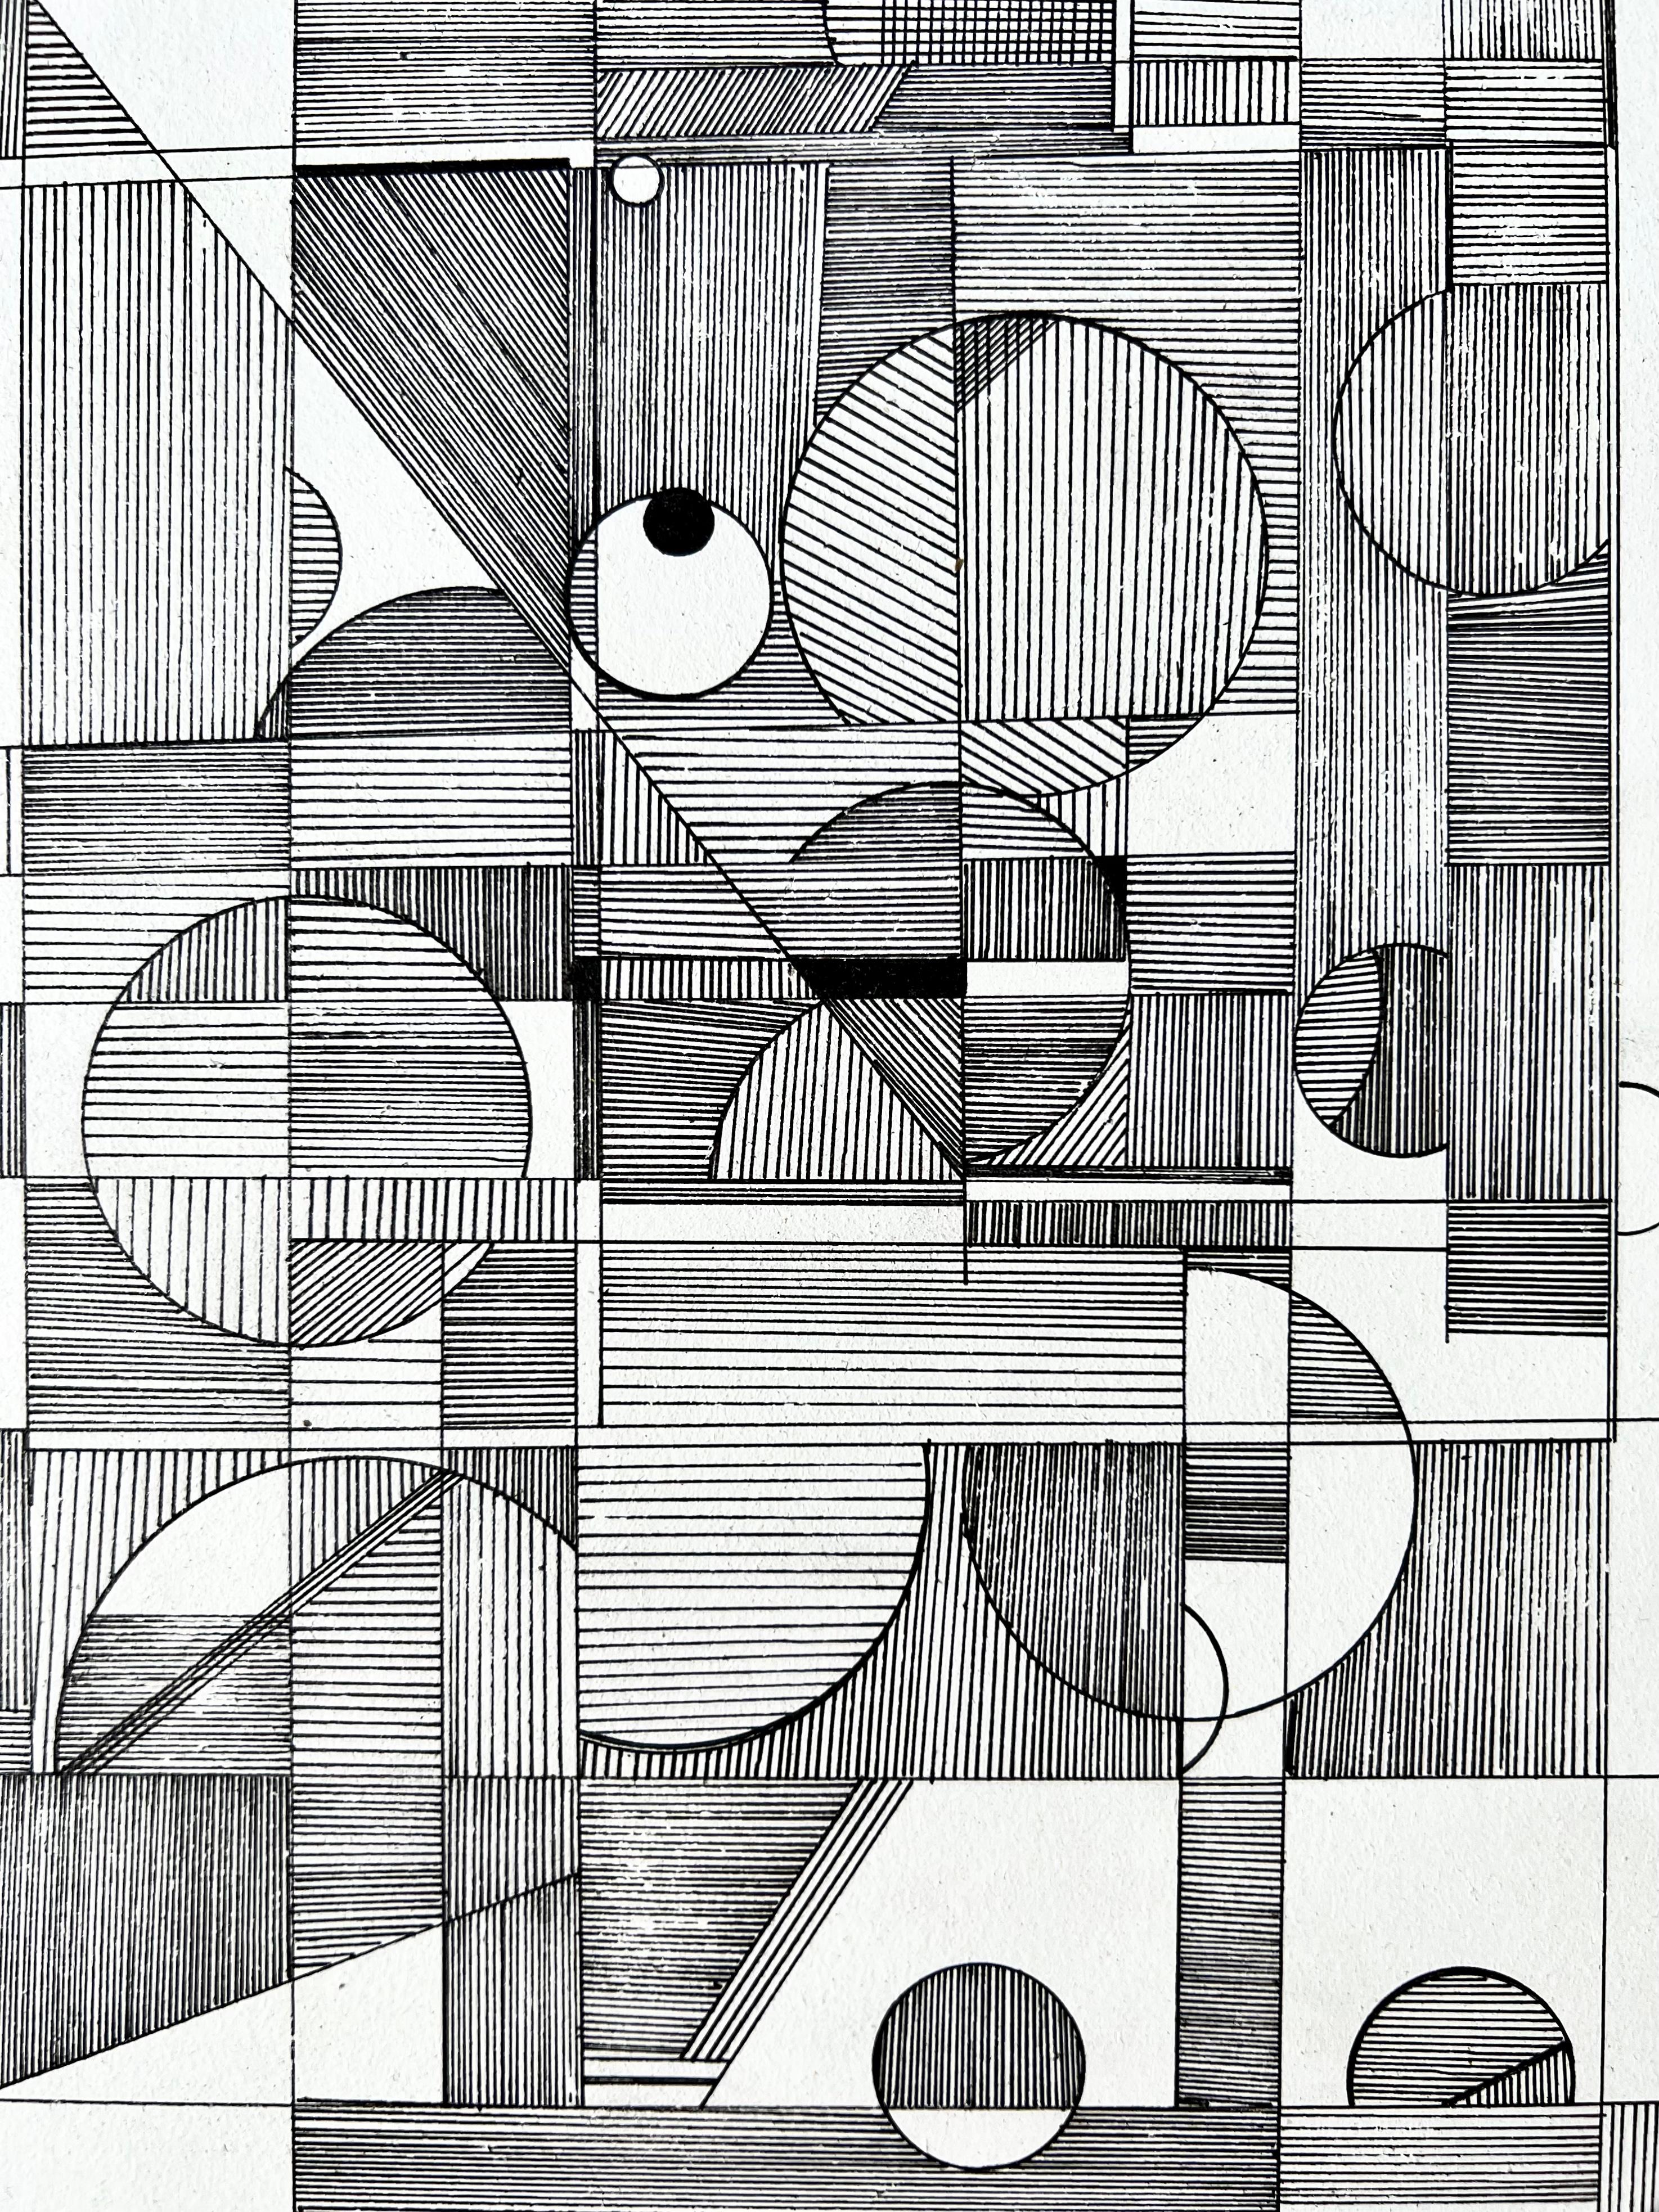 Paint Desert Drawing N.001, Original Black and White Archival Ink Drawing on Hardwood For Sale